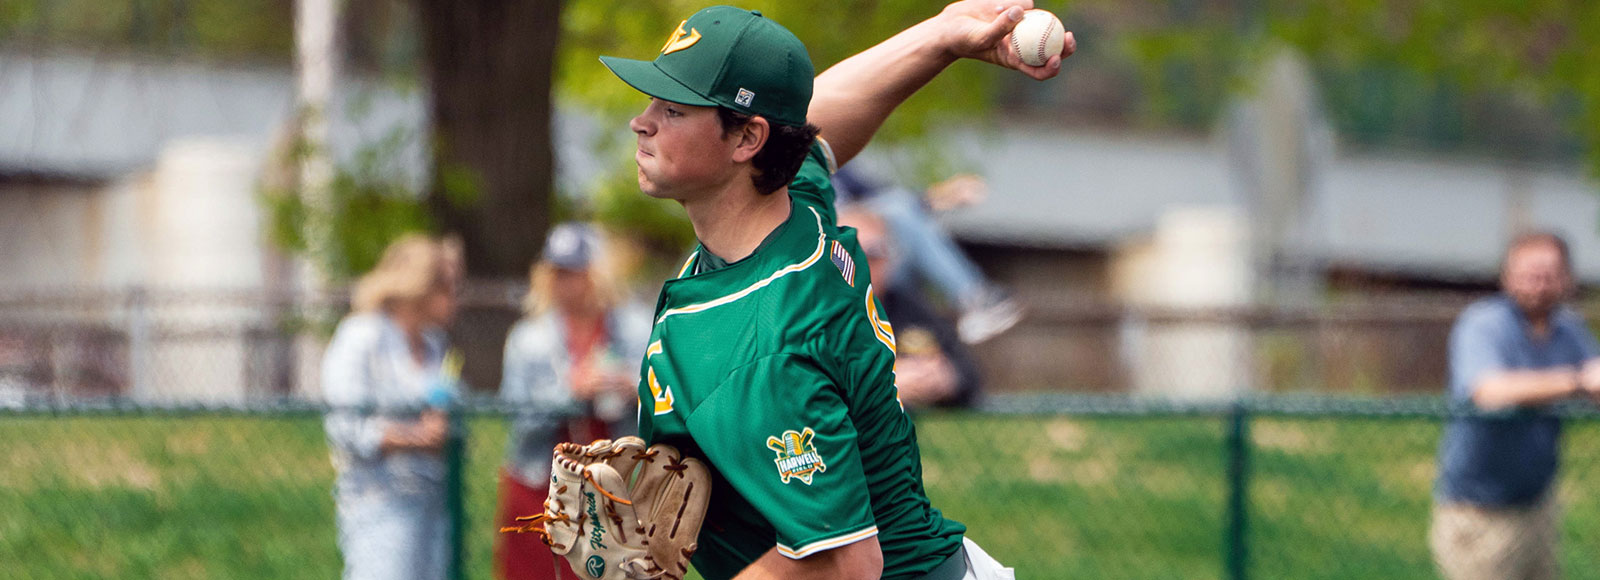 Karter Fitzpatrick throwing a pitch in a Wayne State baseball game